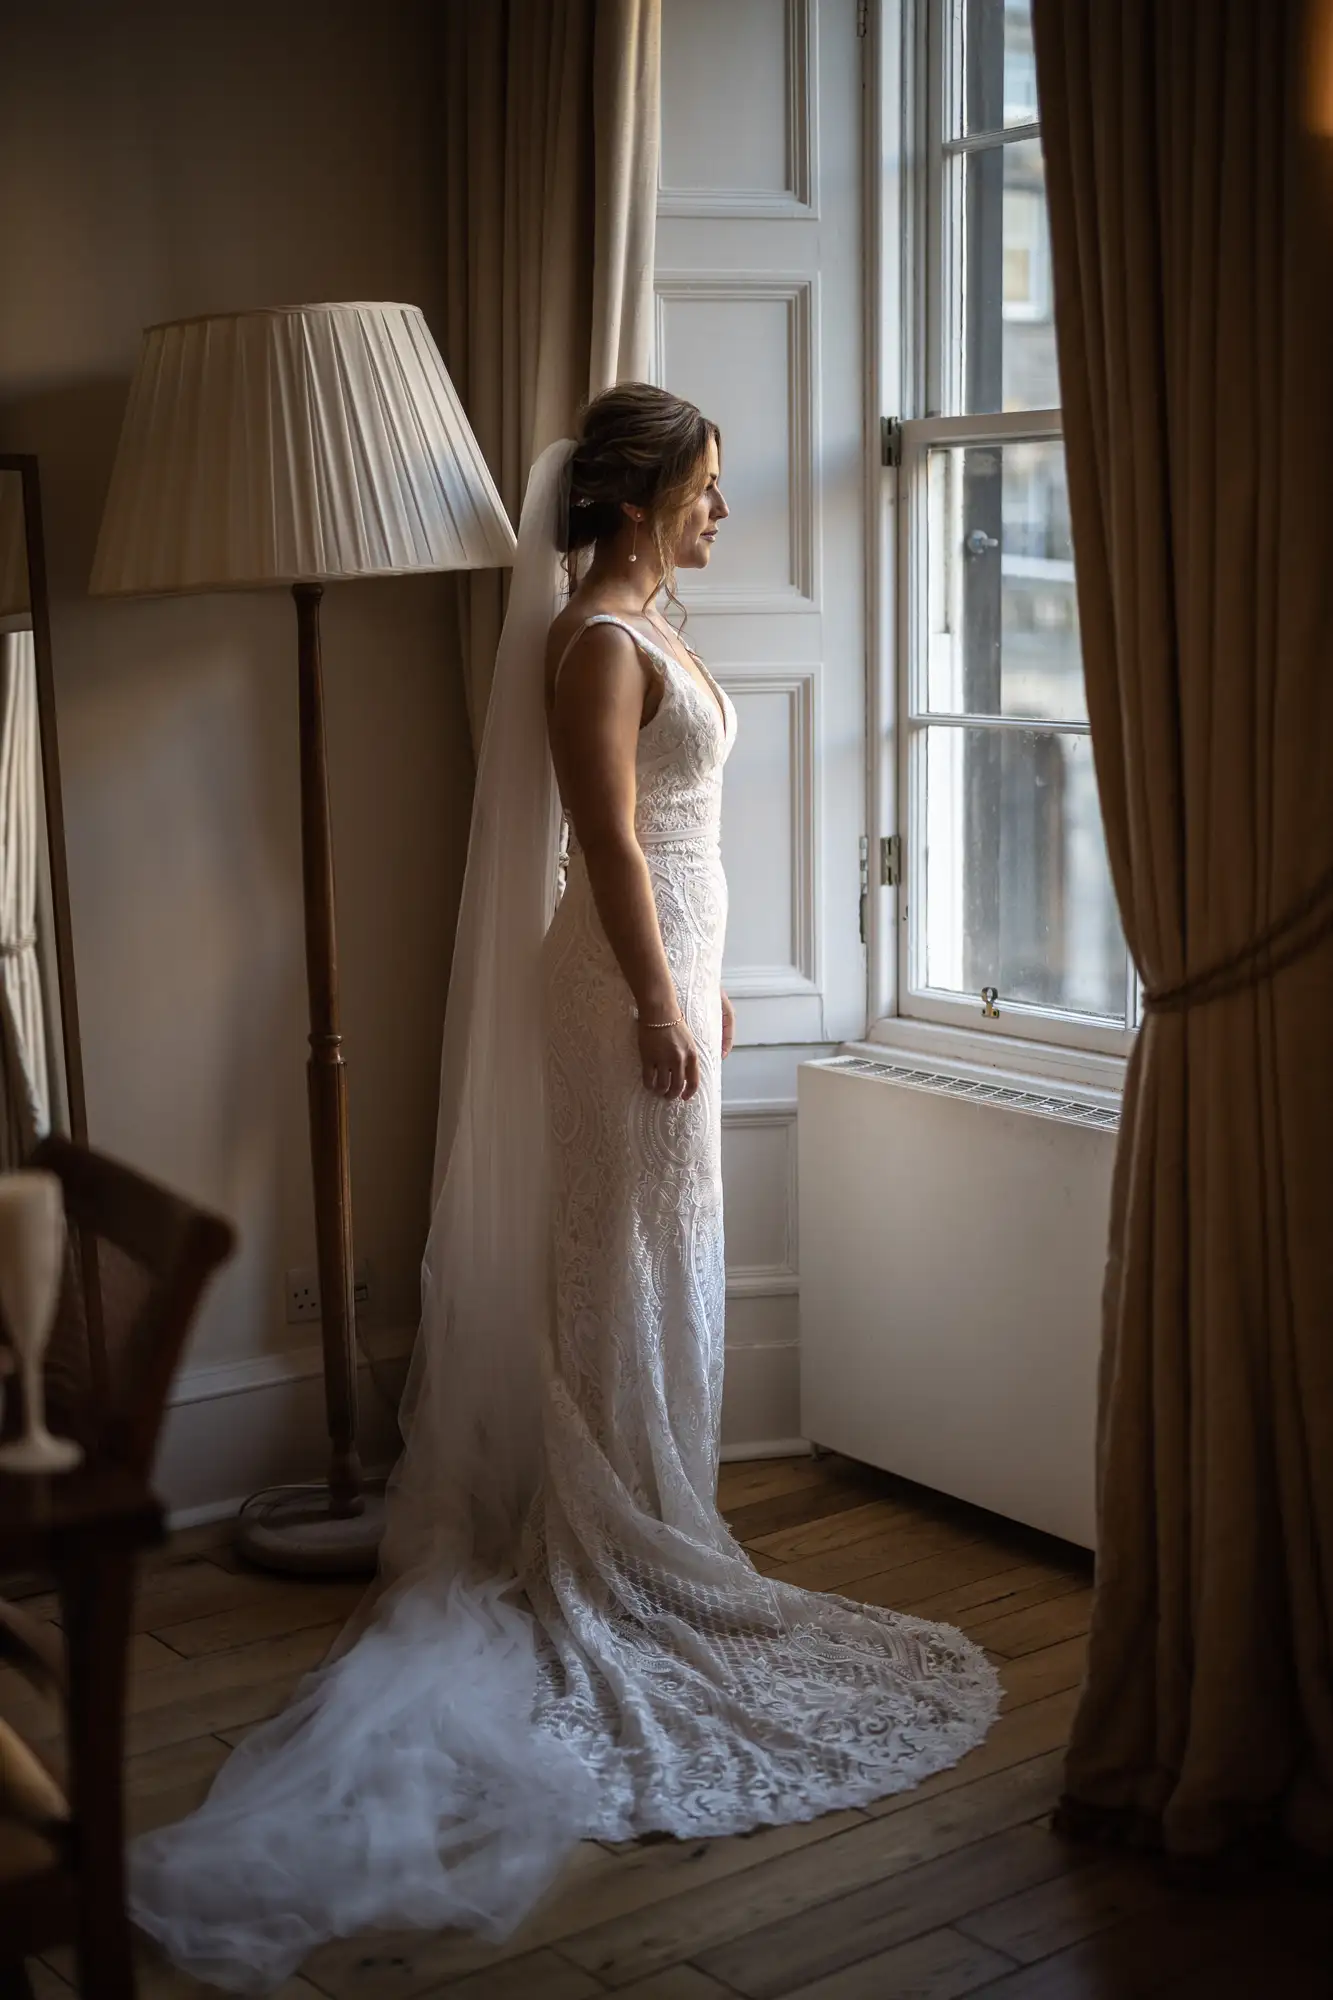 A bride in a lace gown and veil stands by a window, looking out, in a warmly lit room with elegant furniture.